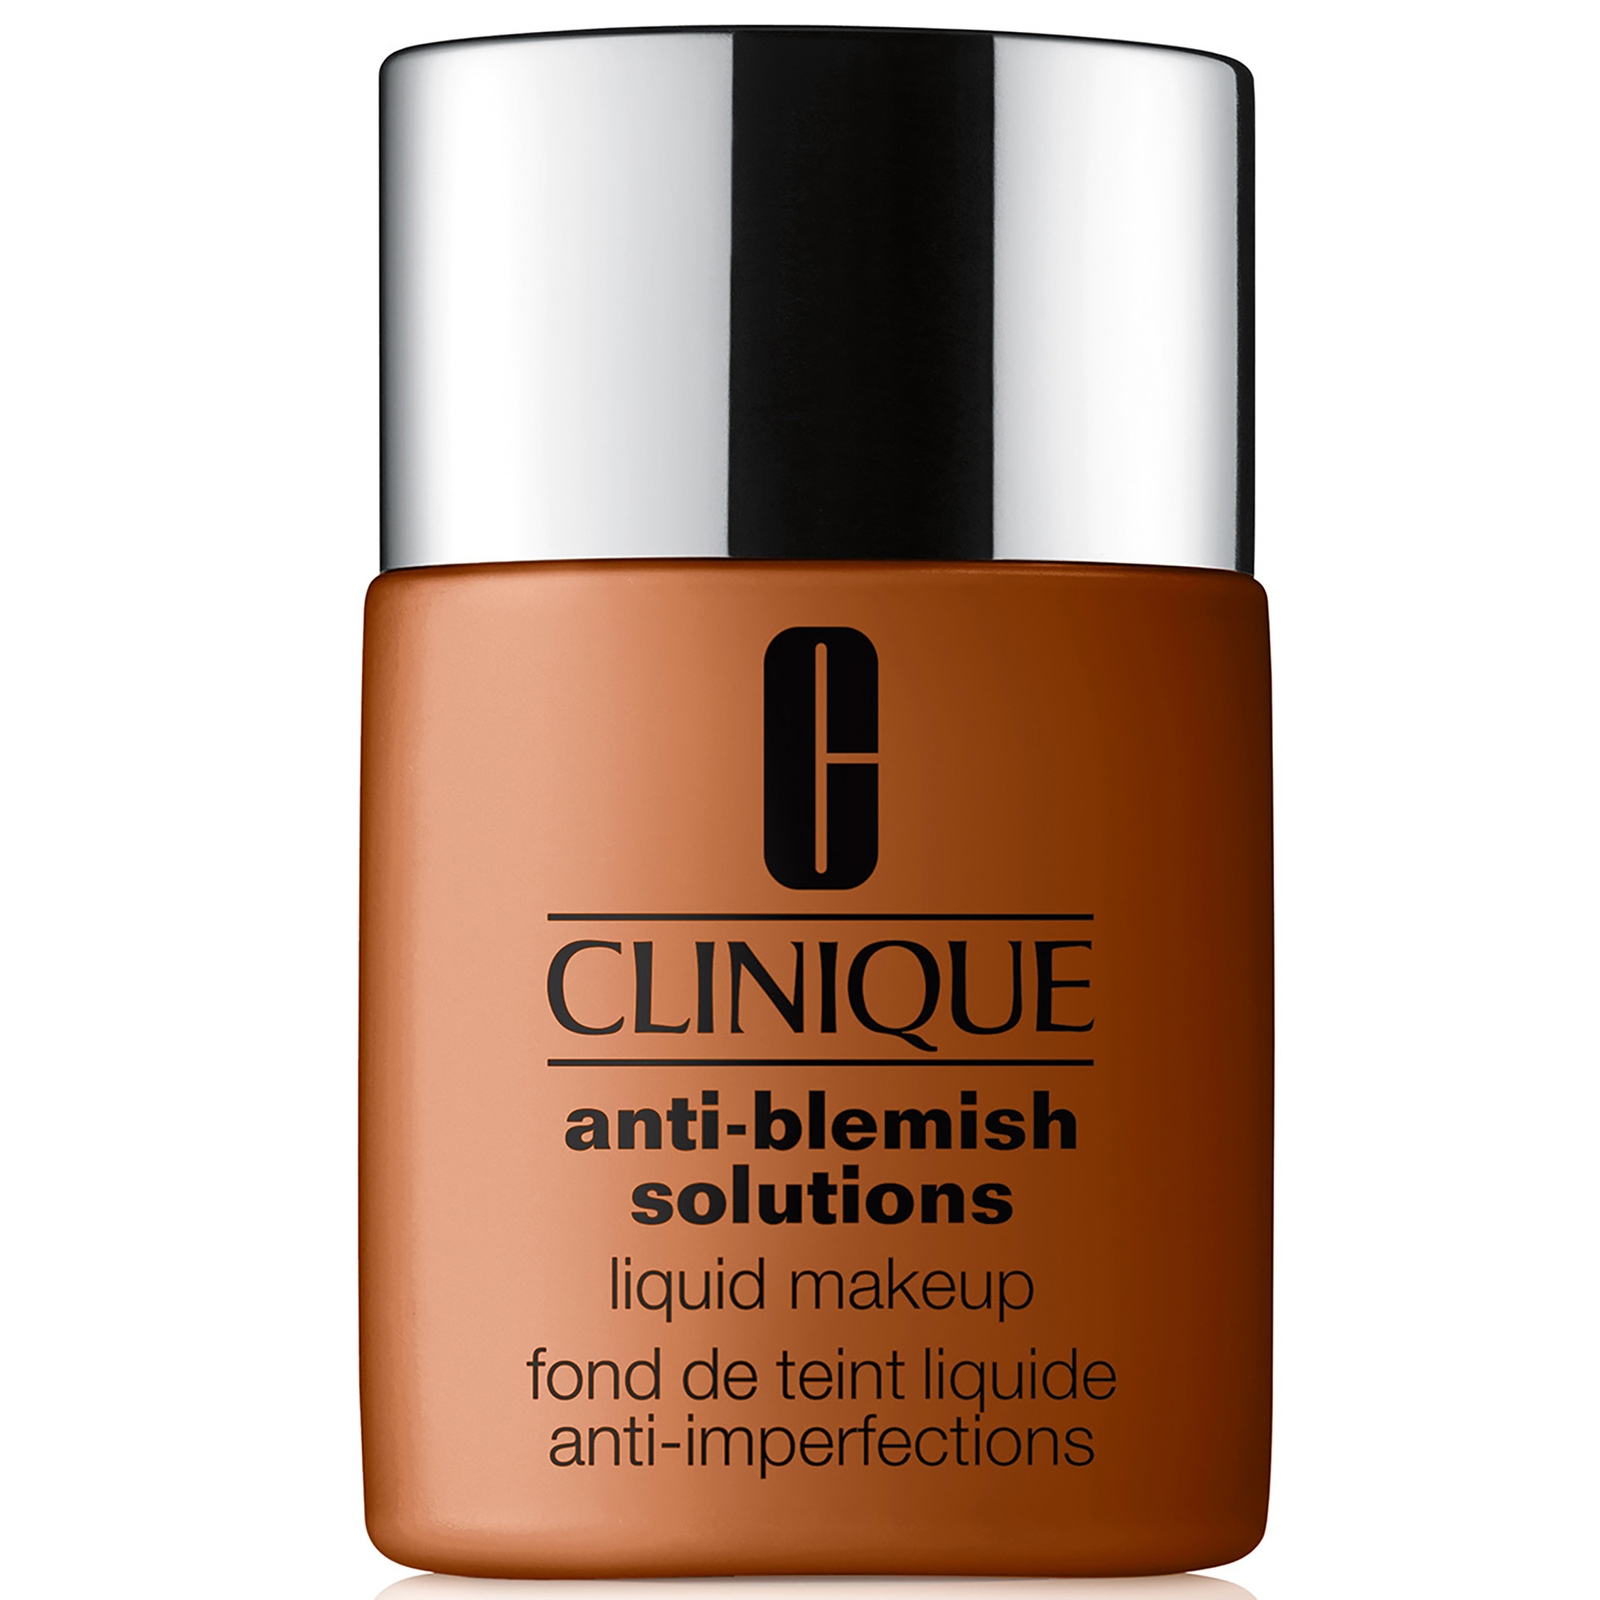 Clinique Anti-Blemish Solutions Liquid Makeup with Salicylic Acid 30ml (Various Shades) - WN 118 Amb